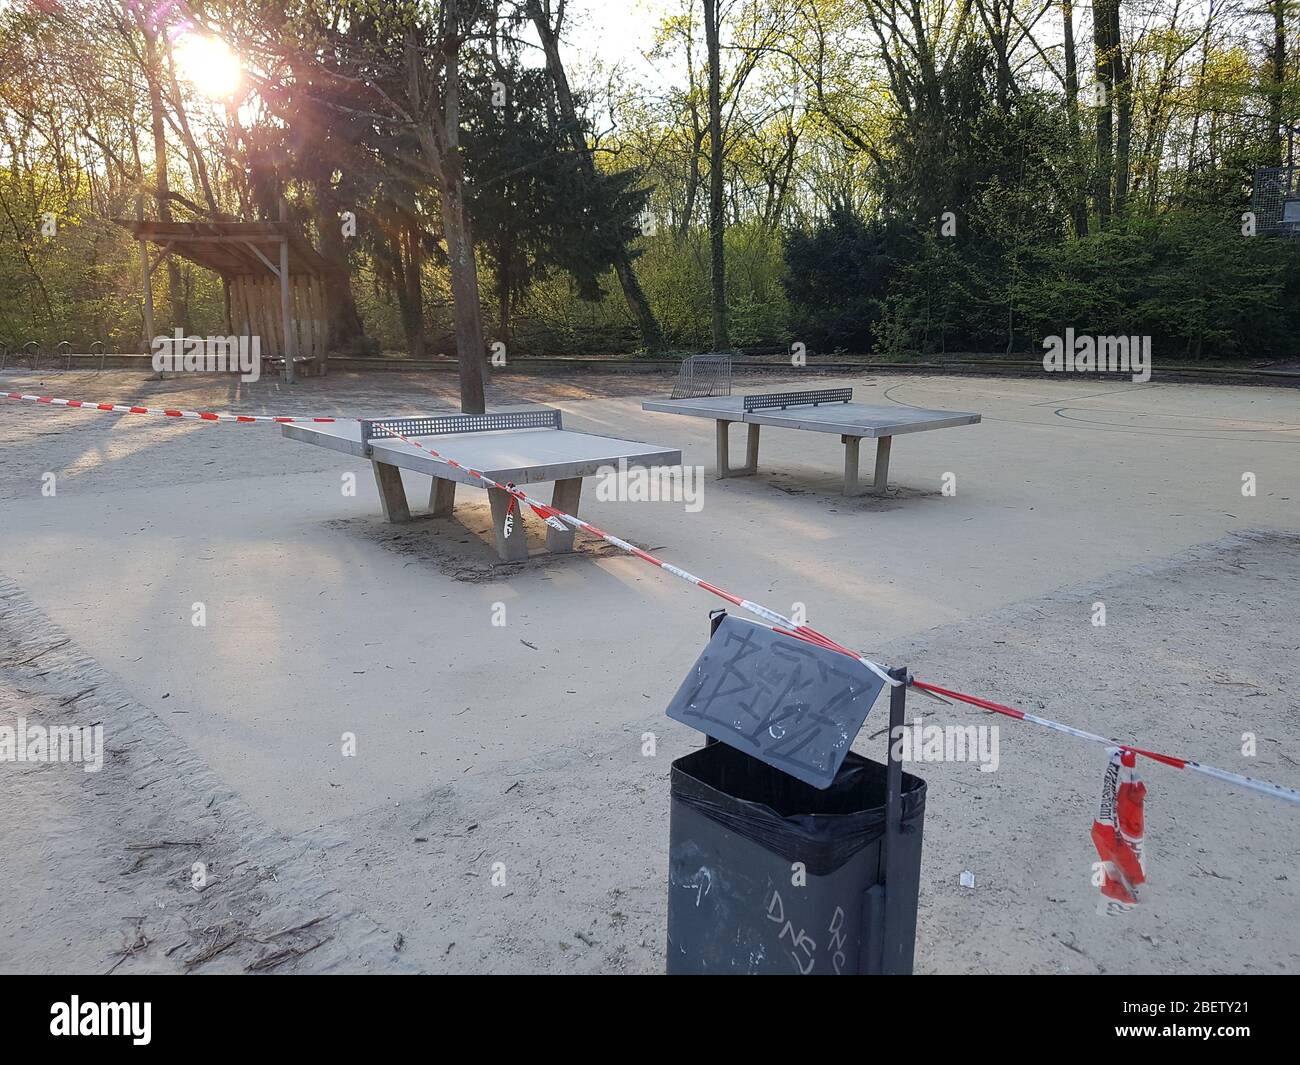 Empty, abandoned athletic ground public park with table tennis table / ping-pong closed by police barrier tape & warning sign - corona virus covid-19 Stock Photo